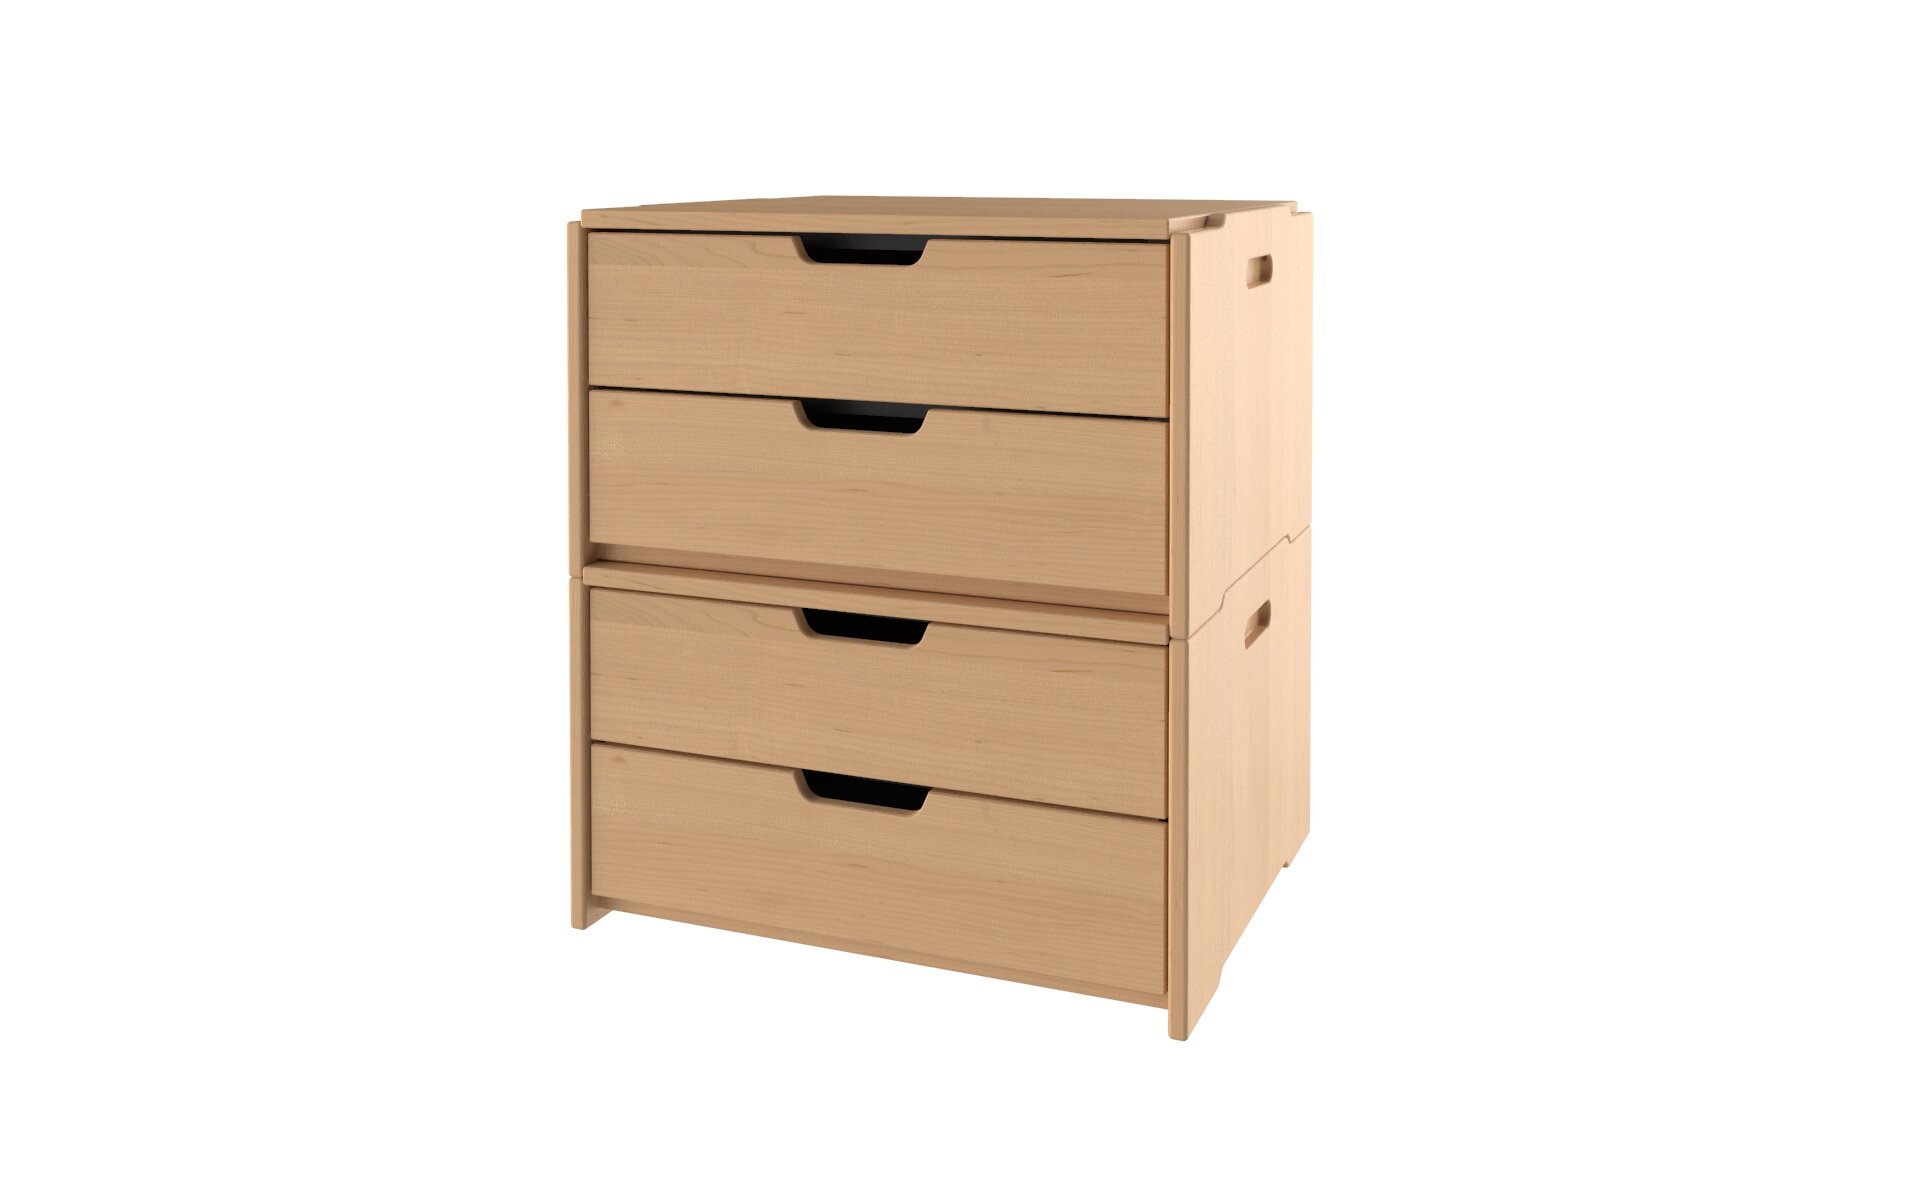 CE 26W 2 DRAWER UNDERBED STACKED.2524.jpg